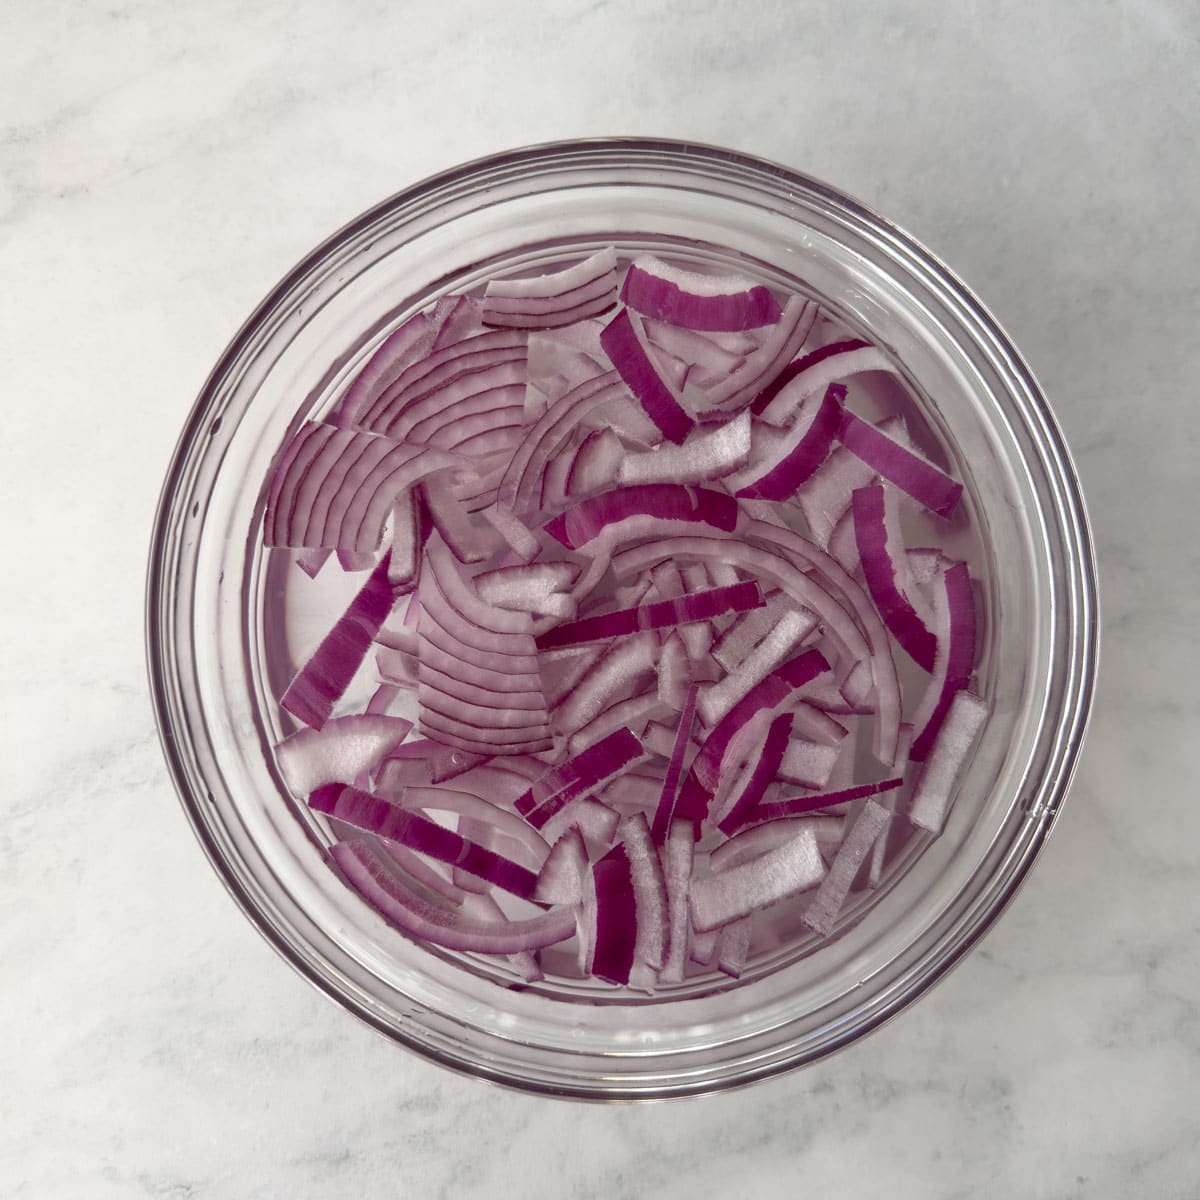 Soaking thinly sliced red onions in cold water to reduce their pungency.